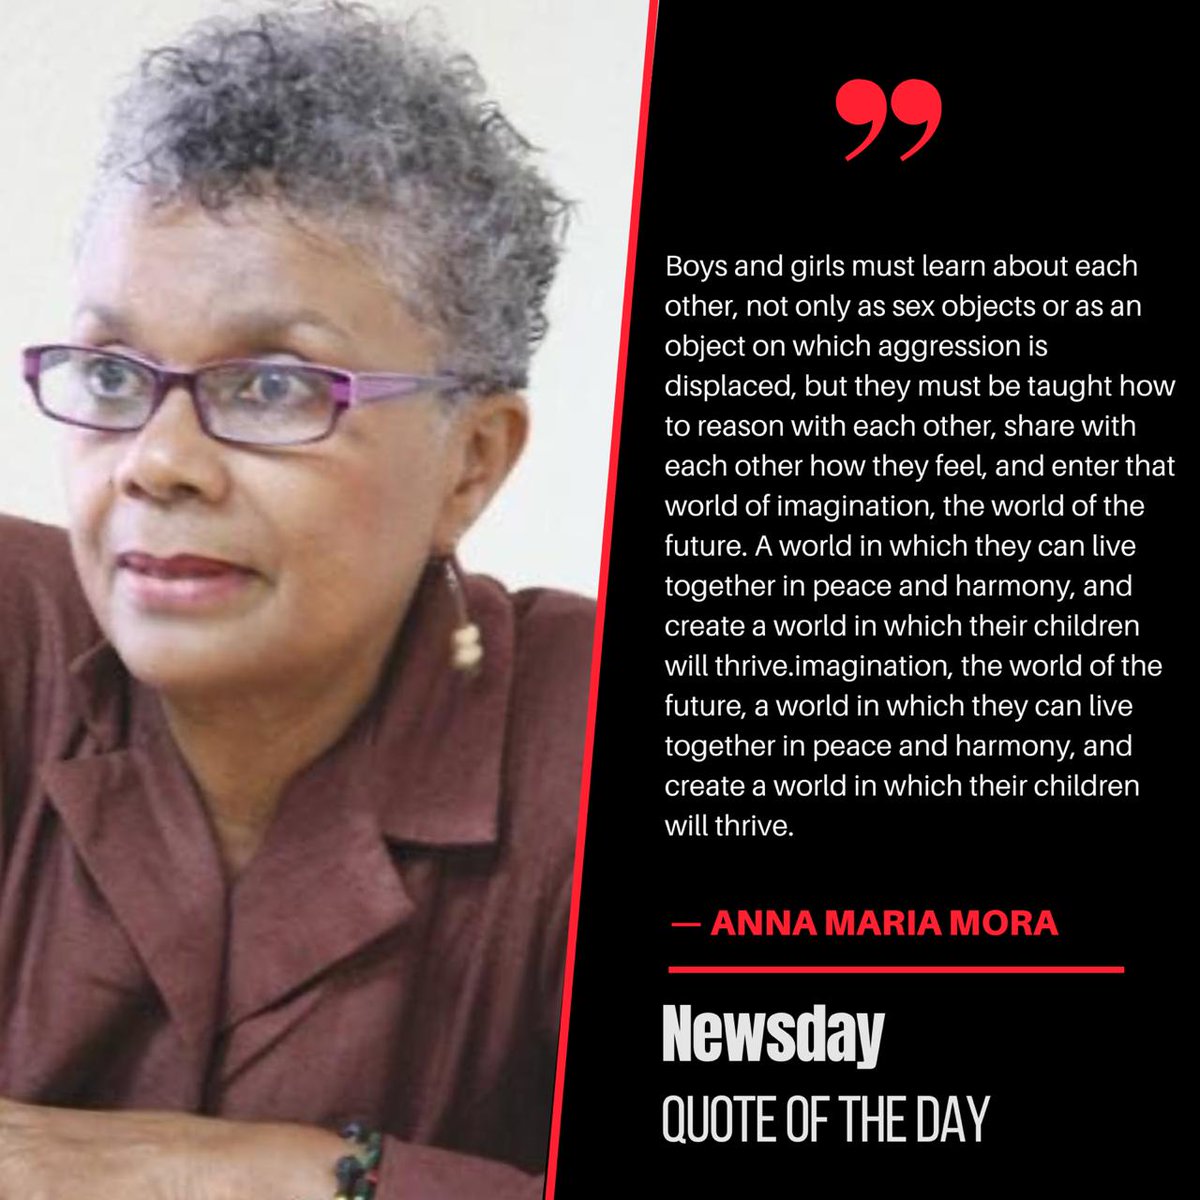 Quote of the day by Anna María Mora in today’s Newsday commentary, ‘Evil’ men?